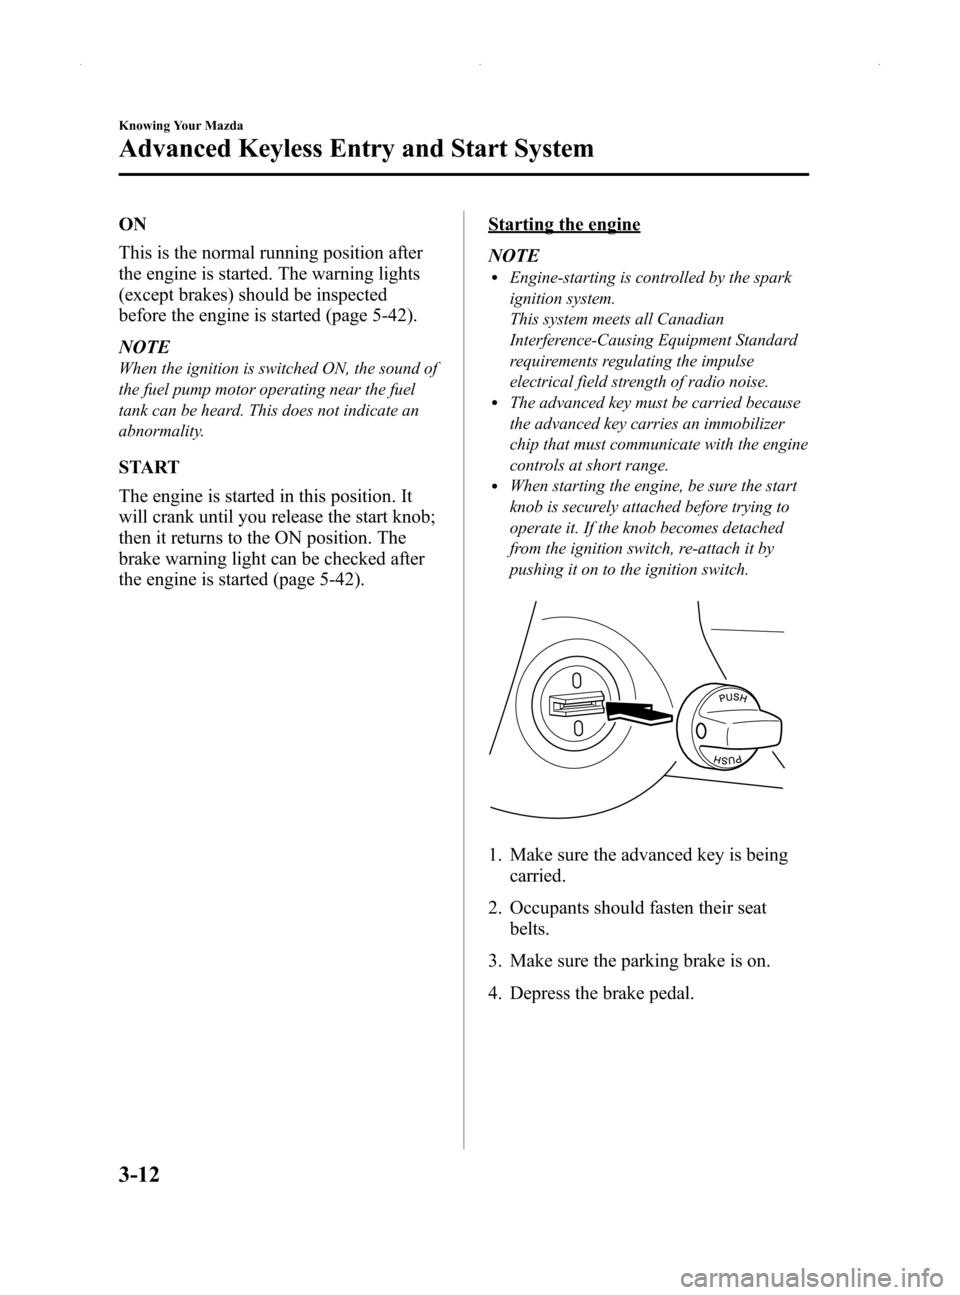 MAZDA MODEL MX-5 2014  Owners Manual (in English) Black plate (66,1)
ON
This is the normal running position after
the engine is started. The warning lights
(except brakes) should be inspected
before the engine is started (page 5-42).
NOTE
When the ig